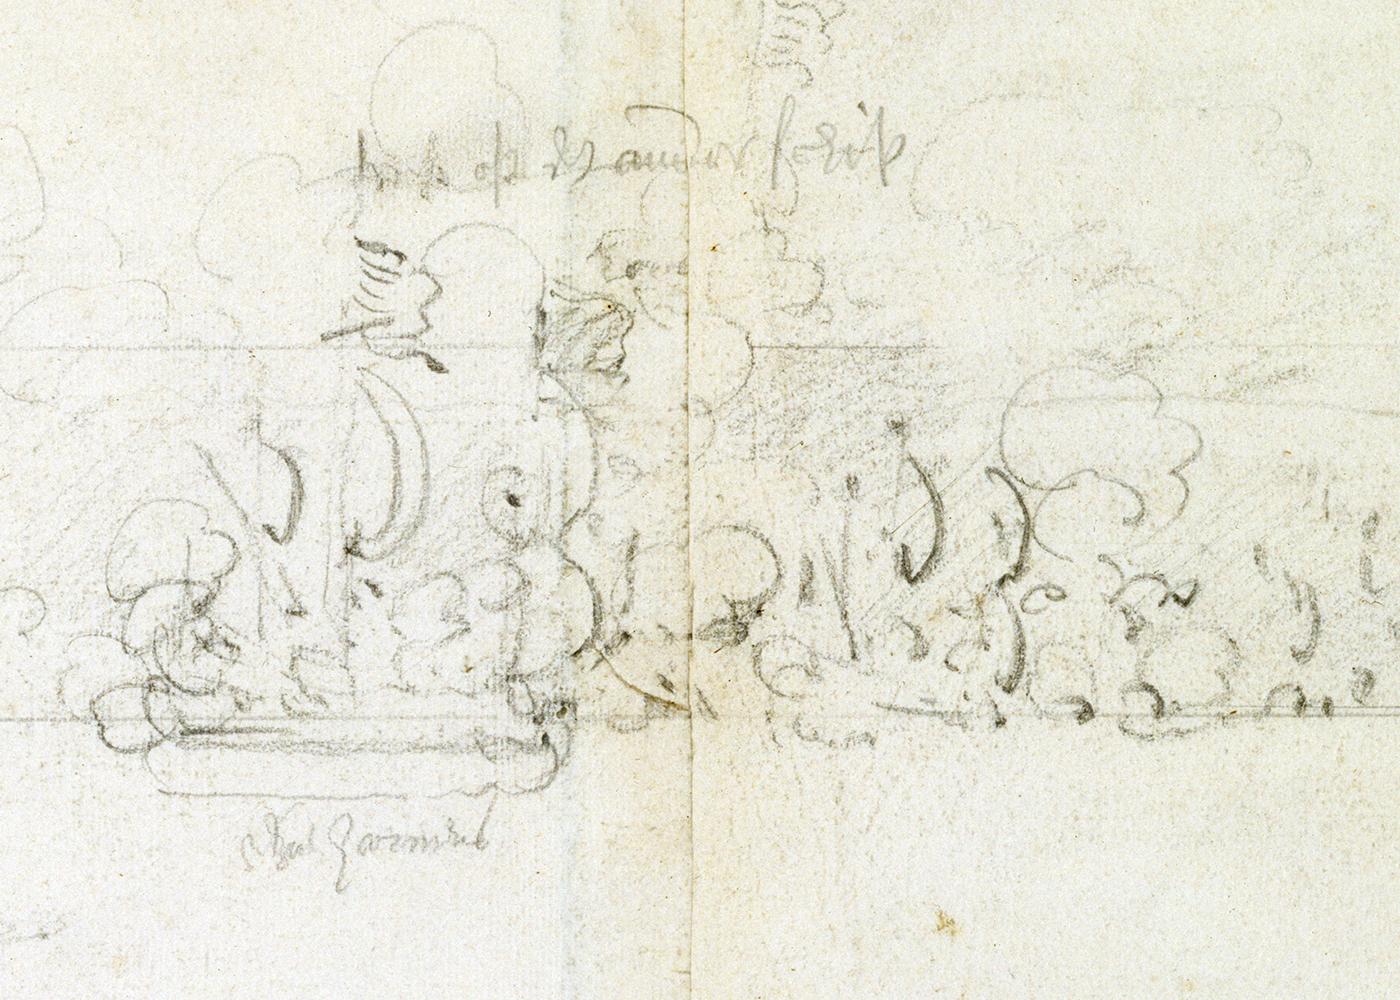 A section of a rough sketch made during a major naval battle. Tall ships are barely visible against the white paper, but the pencil marks suggest the sketch was made quickly while in the middle of the battle itself